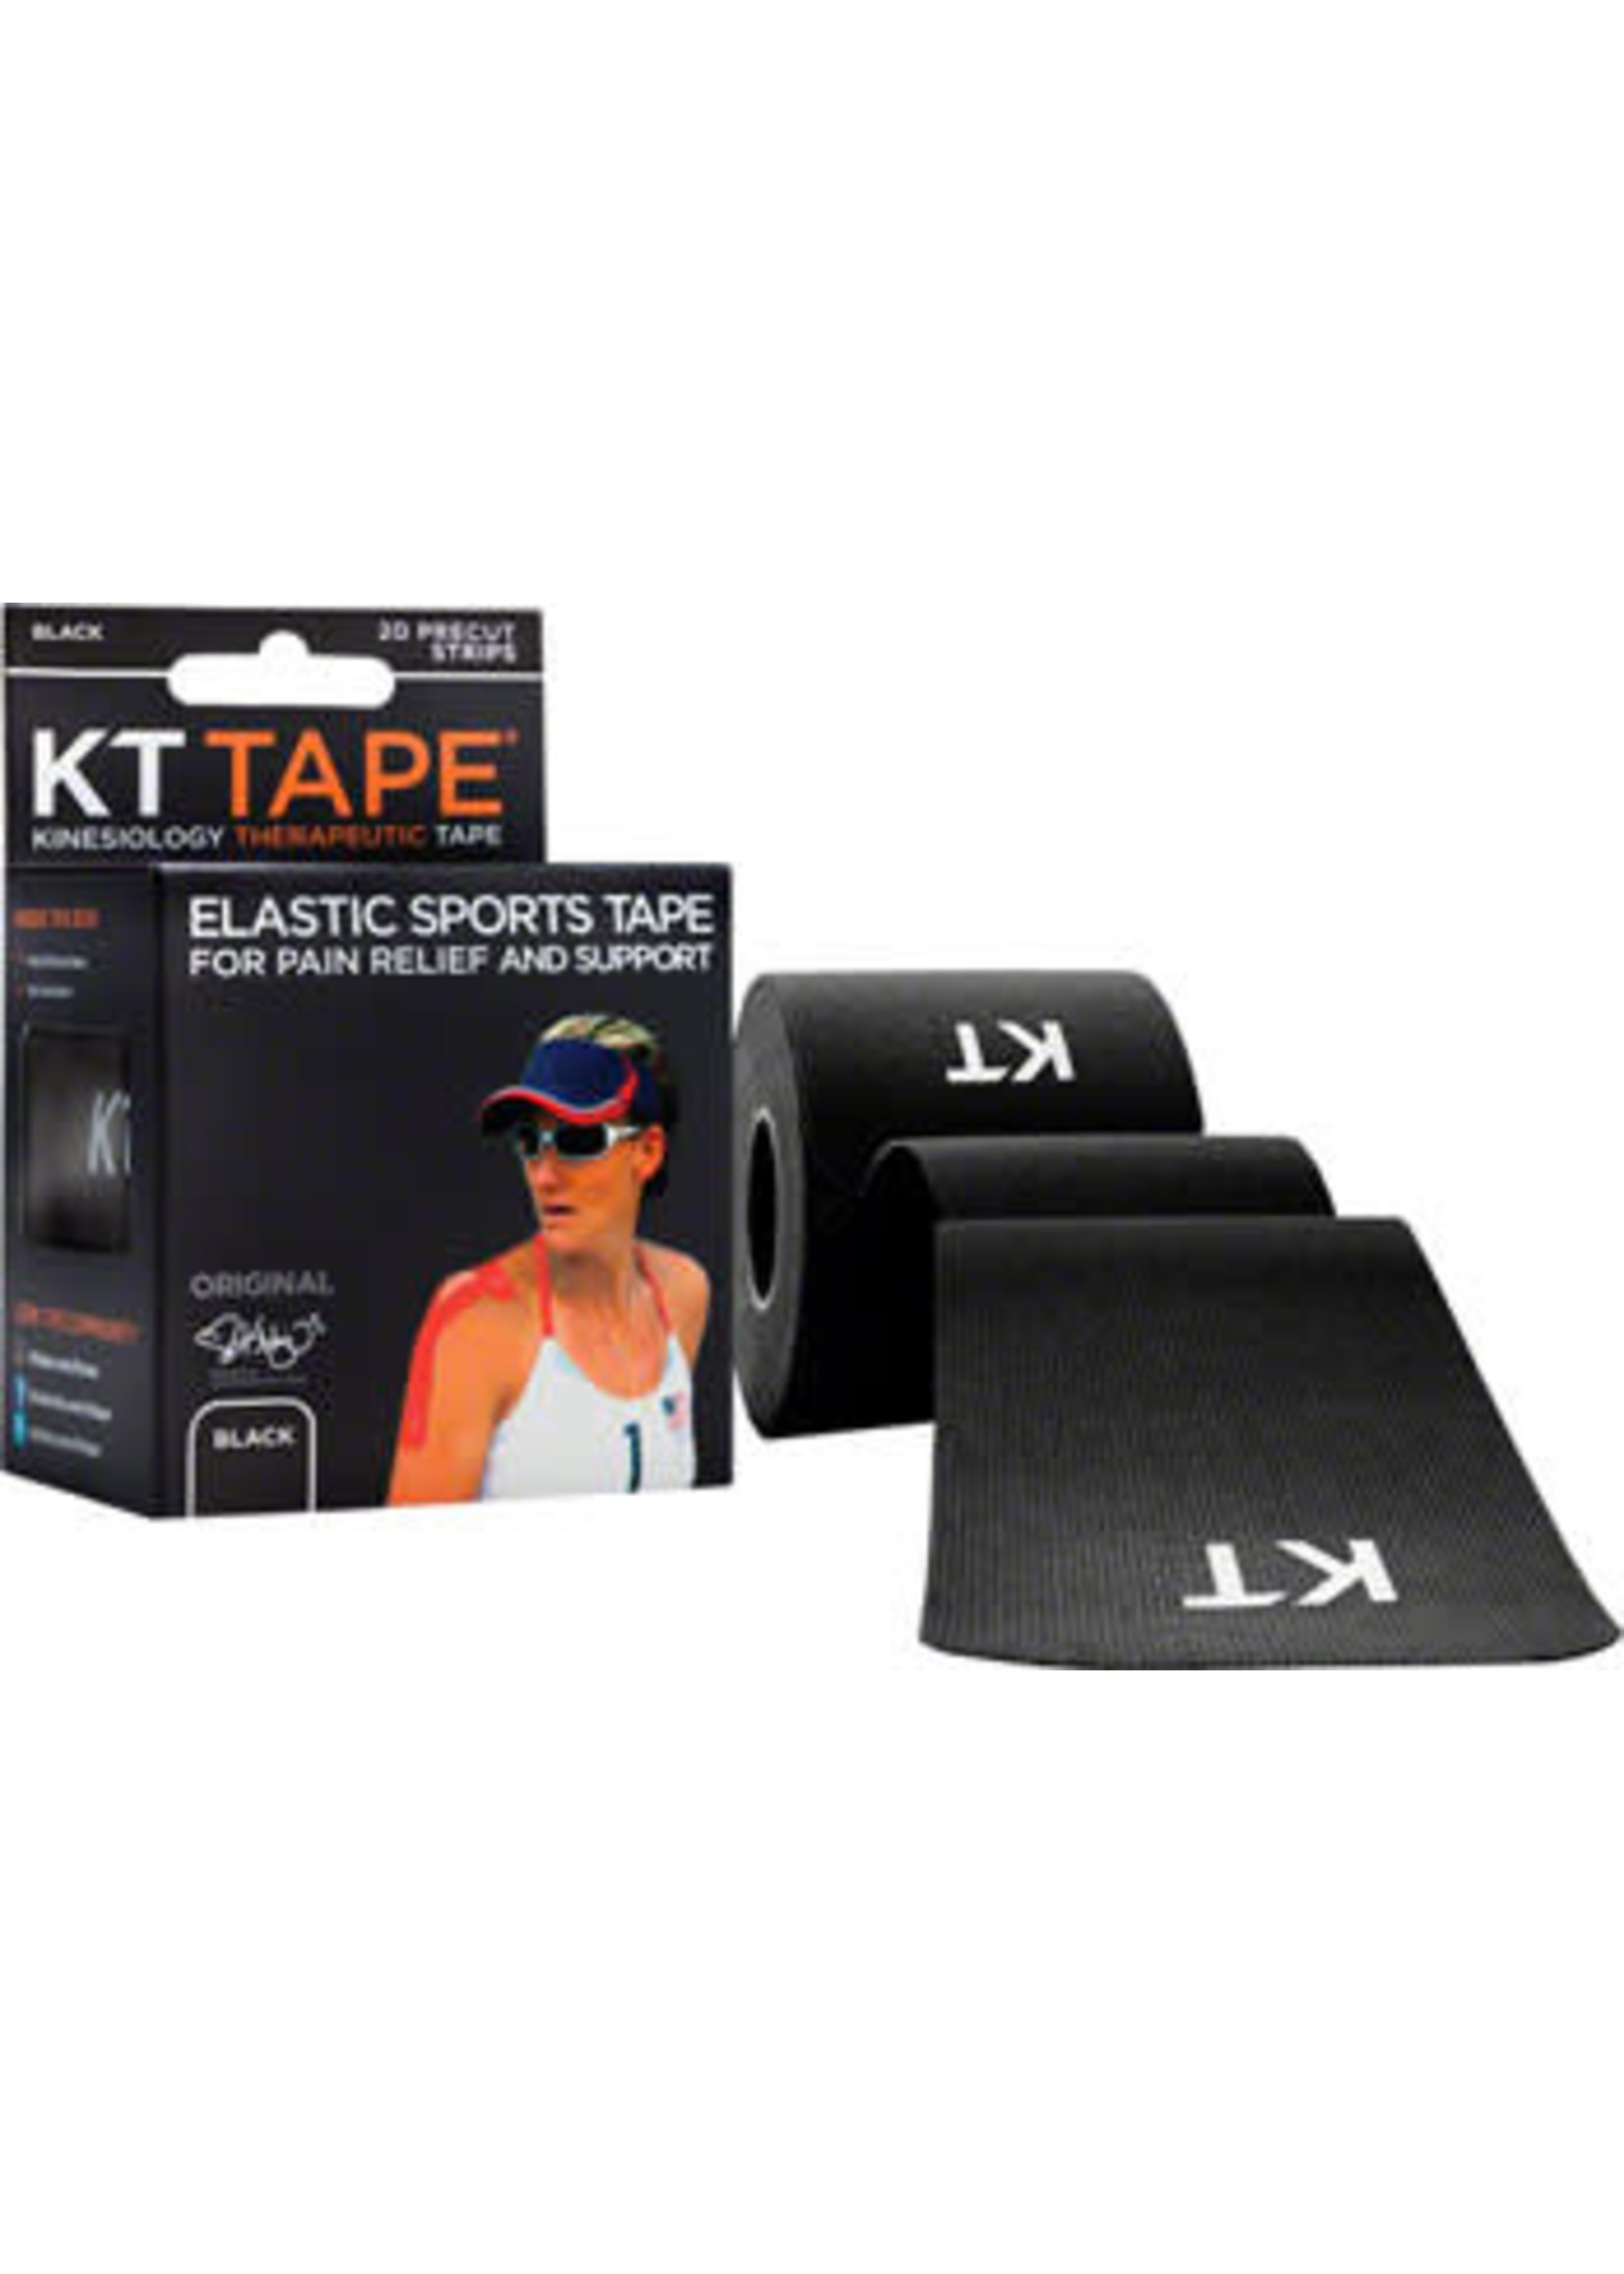 KT Tape KT Tape Kinesiology Therapeutic Body Tape: Roll of 20 Strips, Black